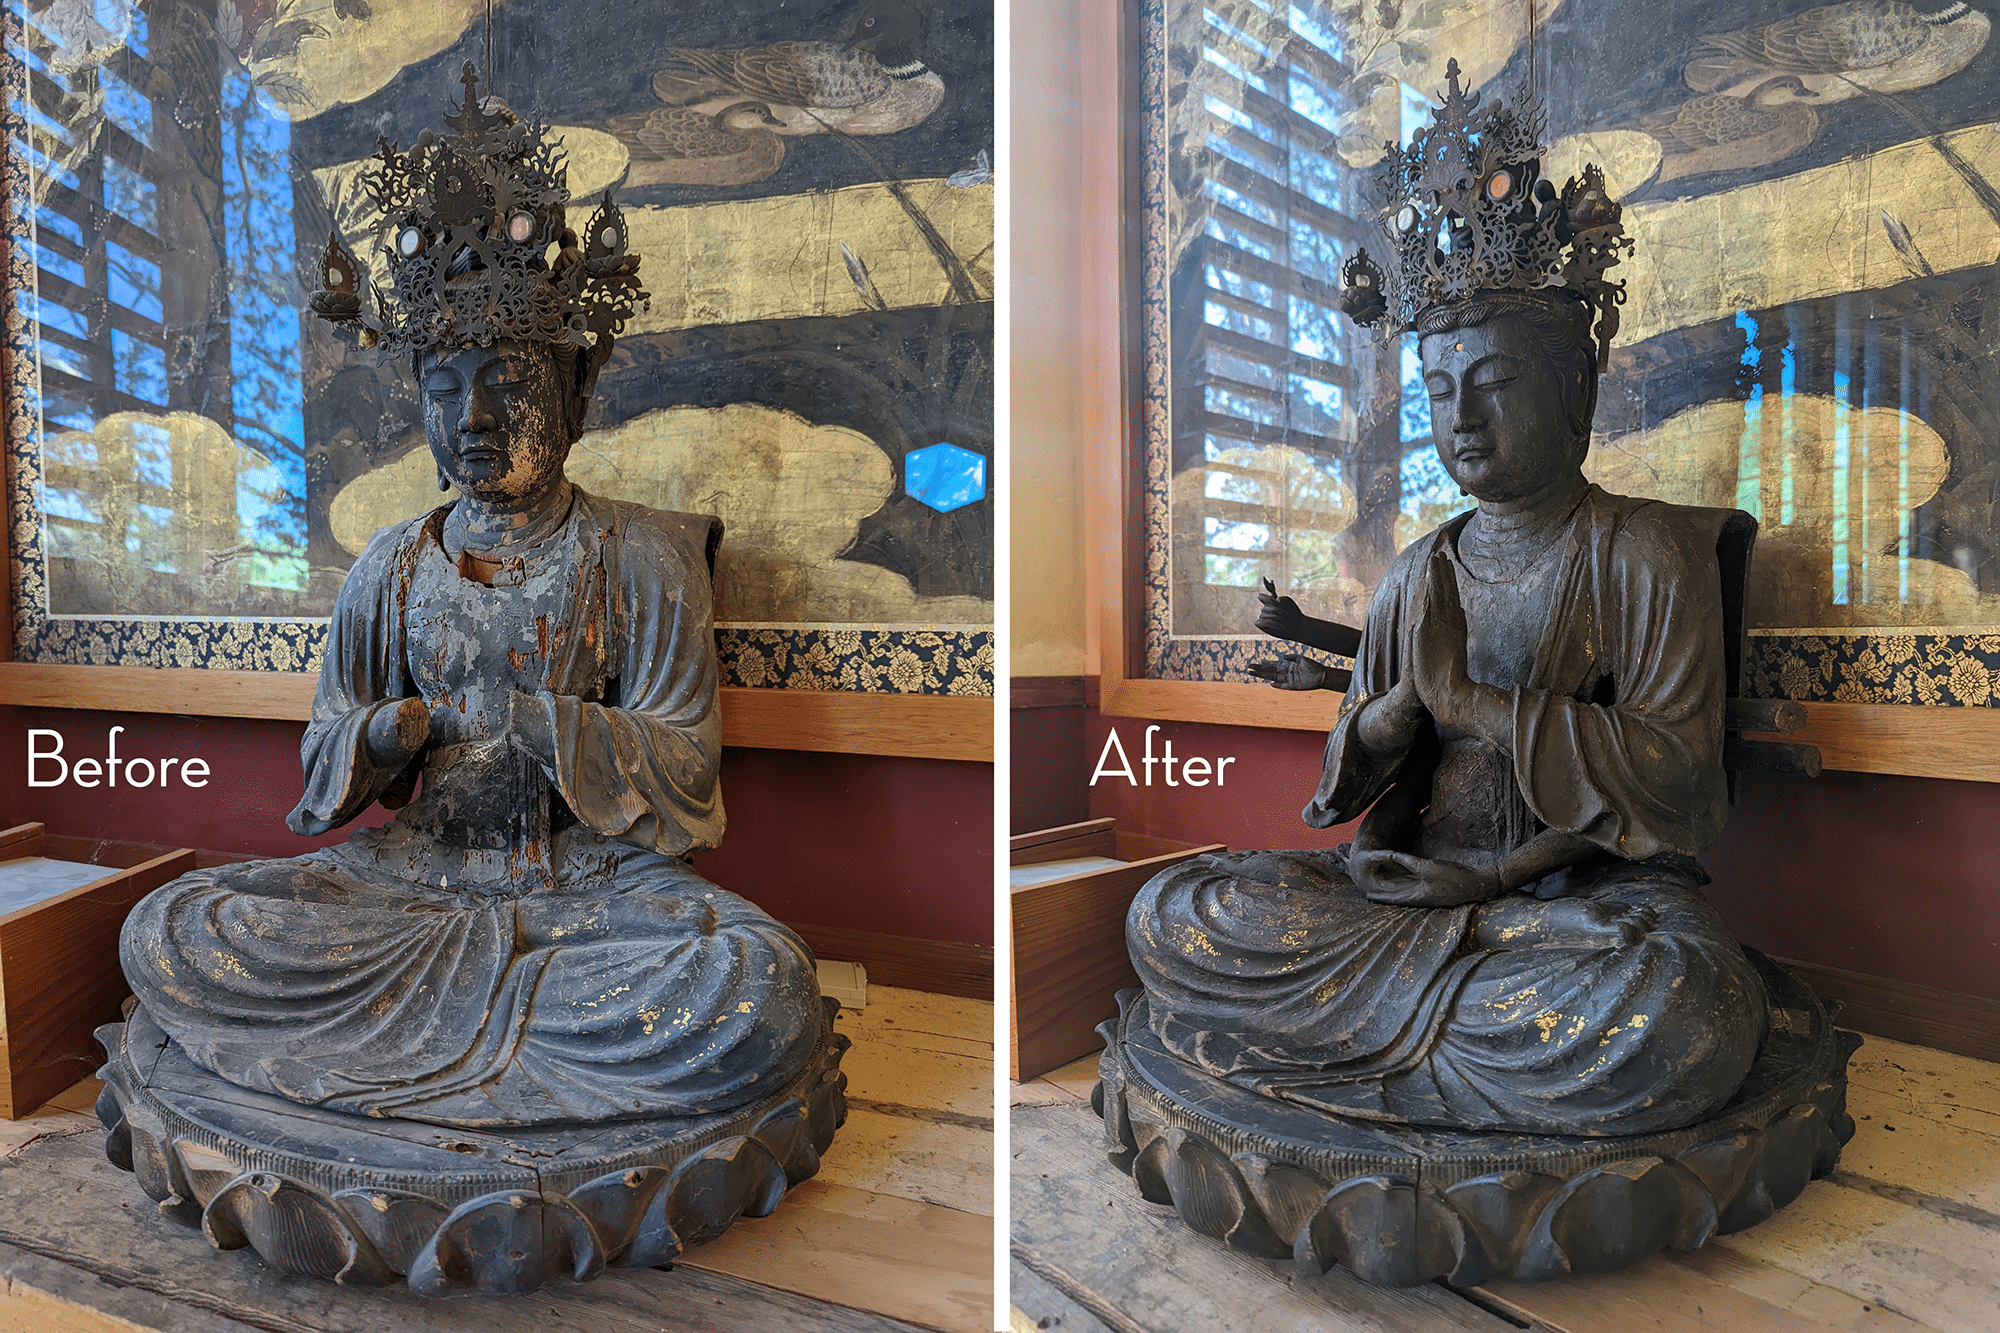 The Senjū Kannon before and after